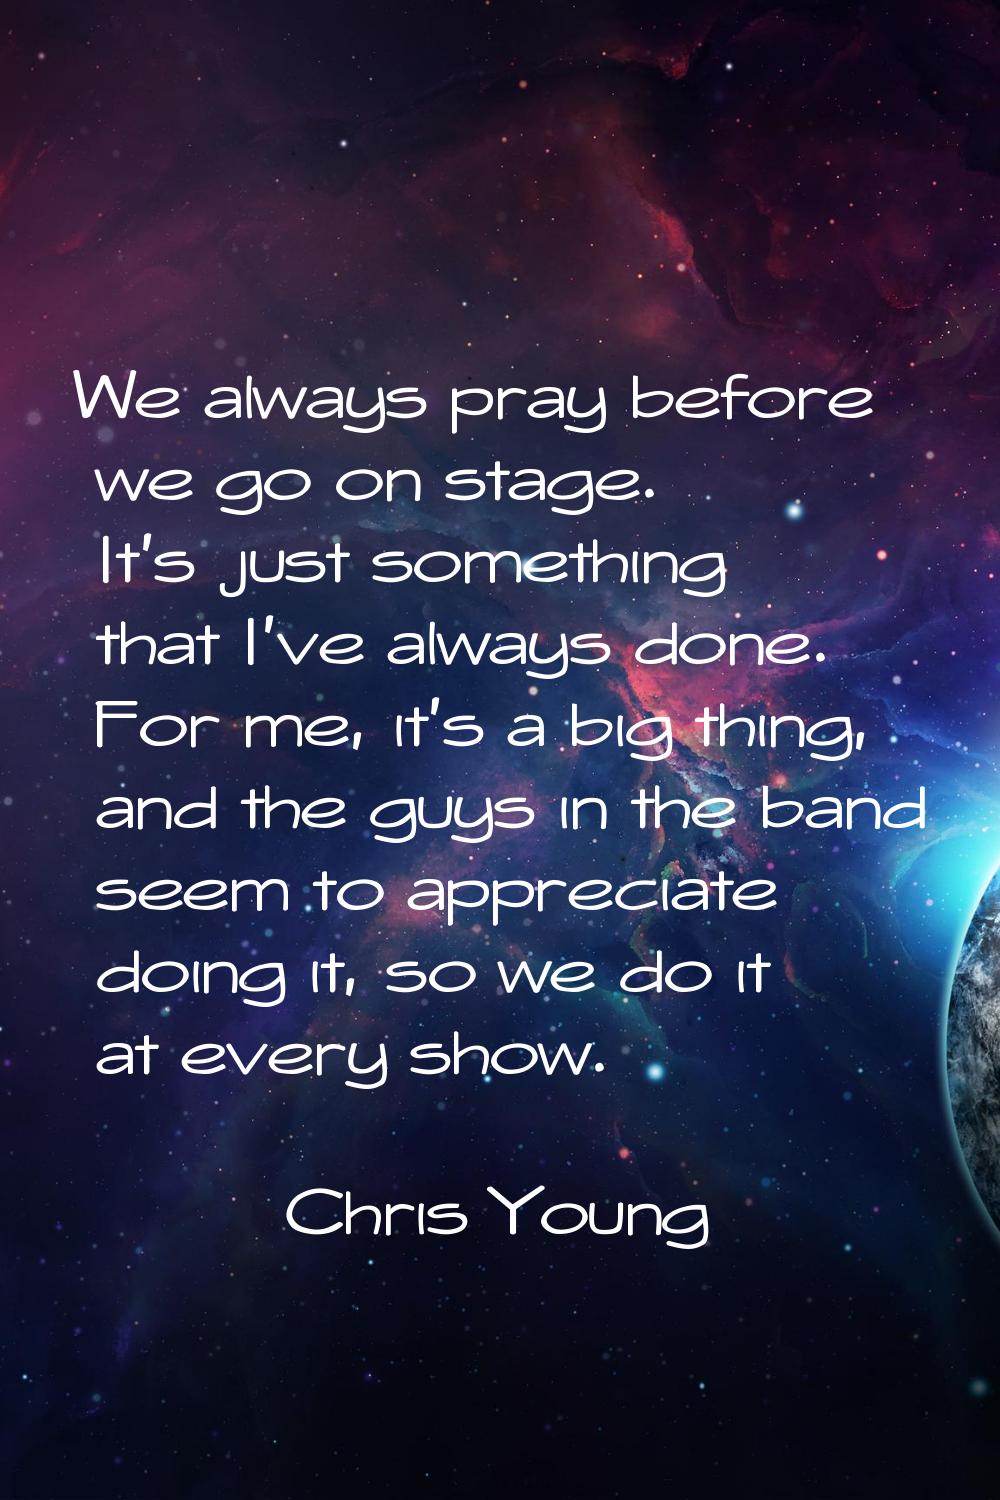 We always pray before we go on stage. It's just something that I've always done. For me, it's a big